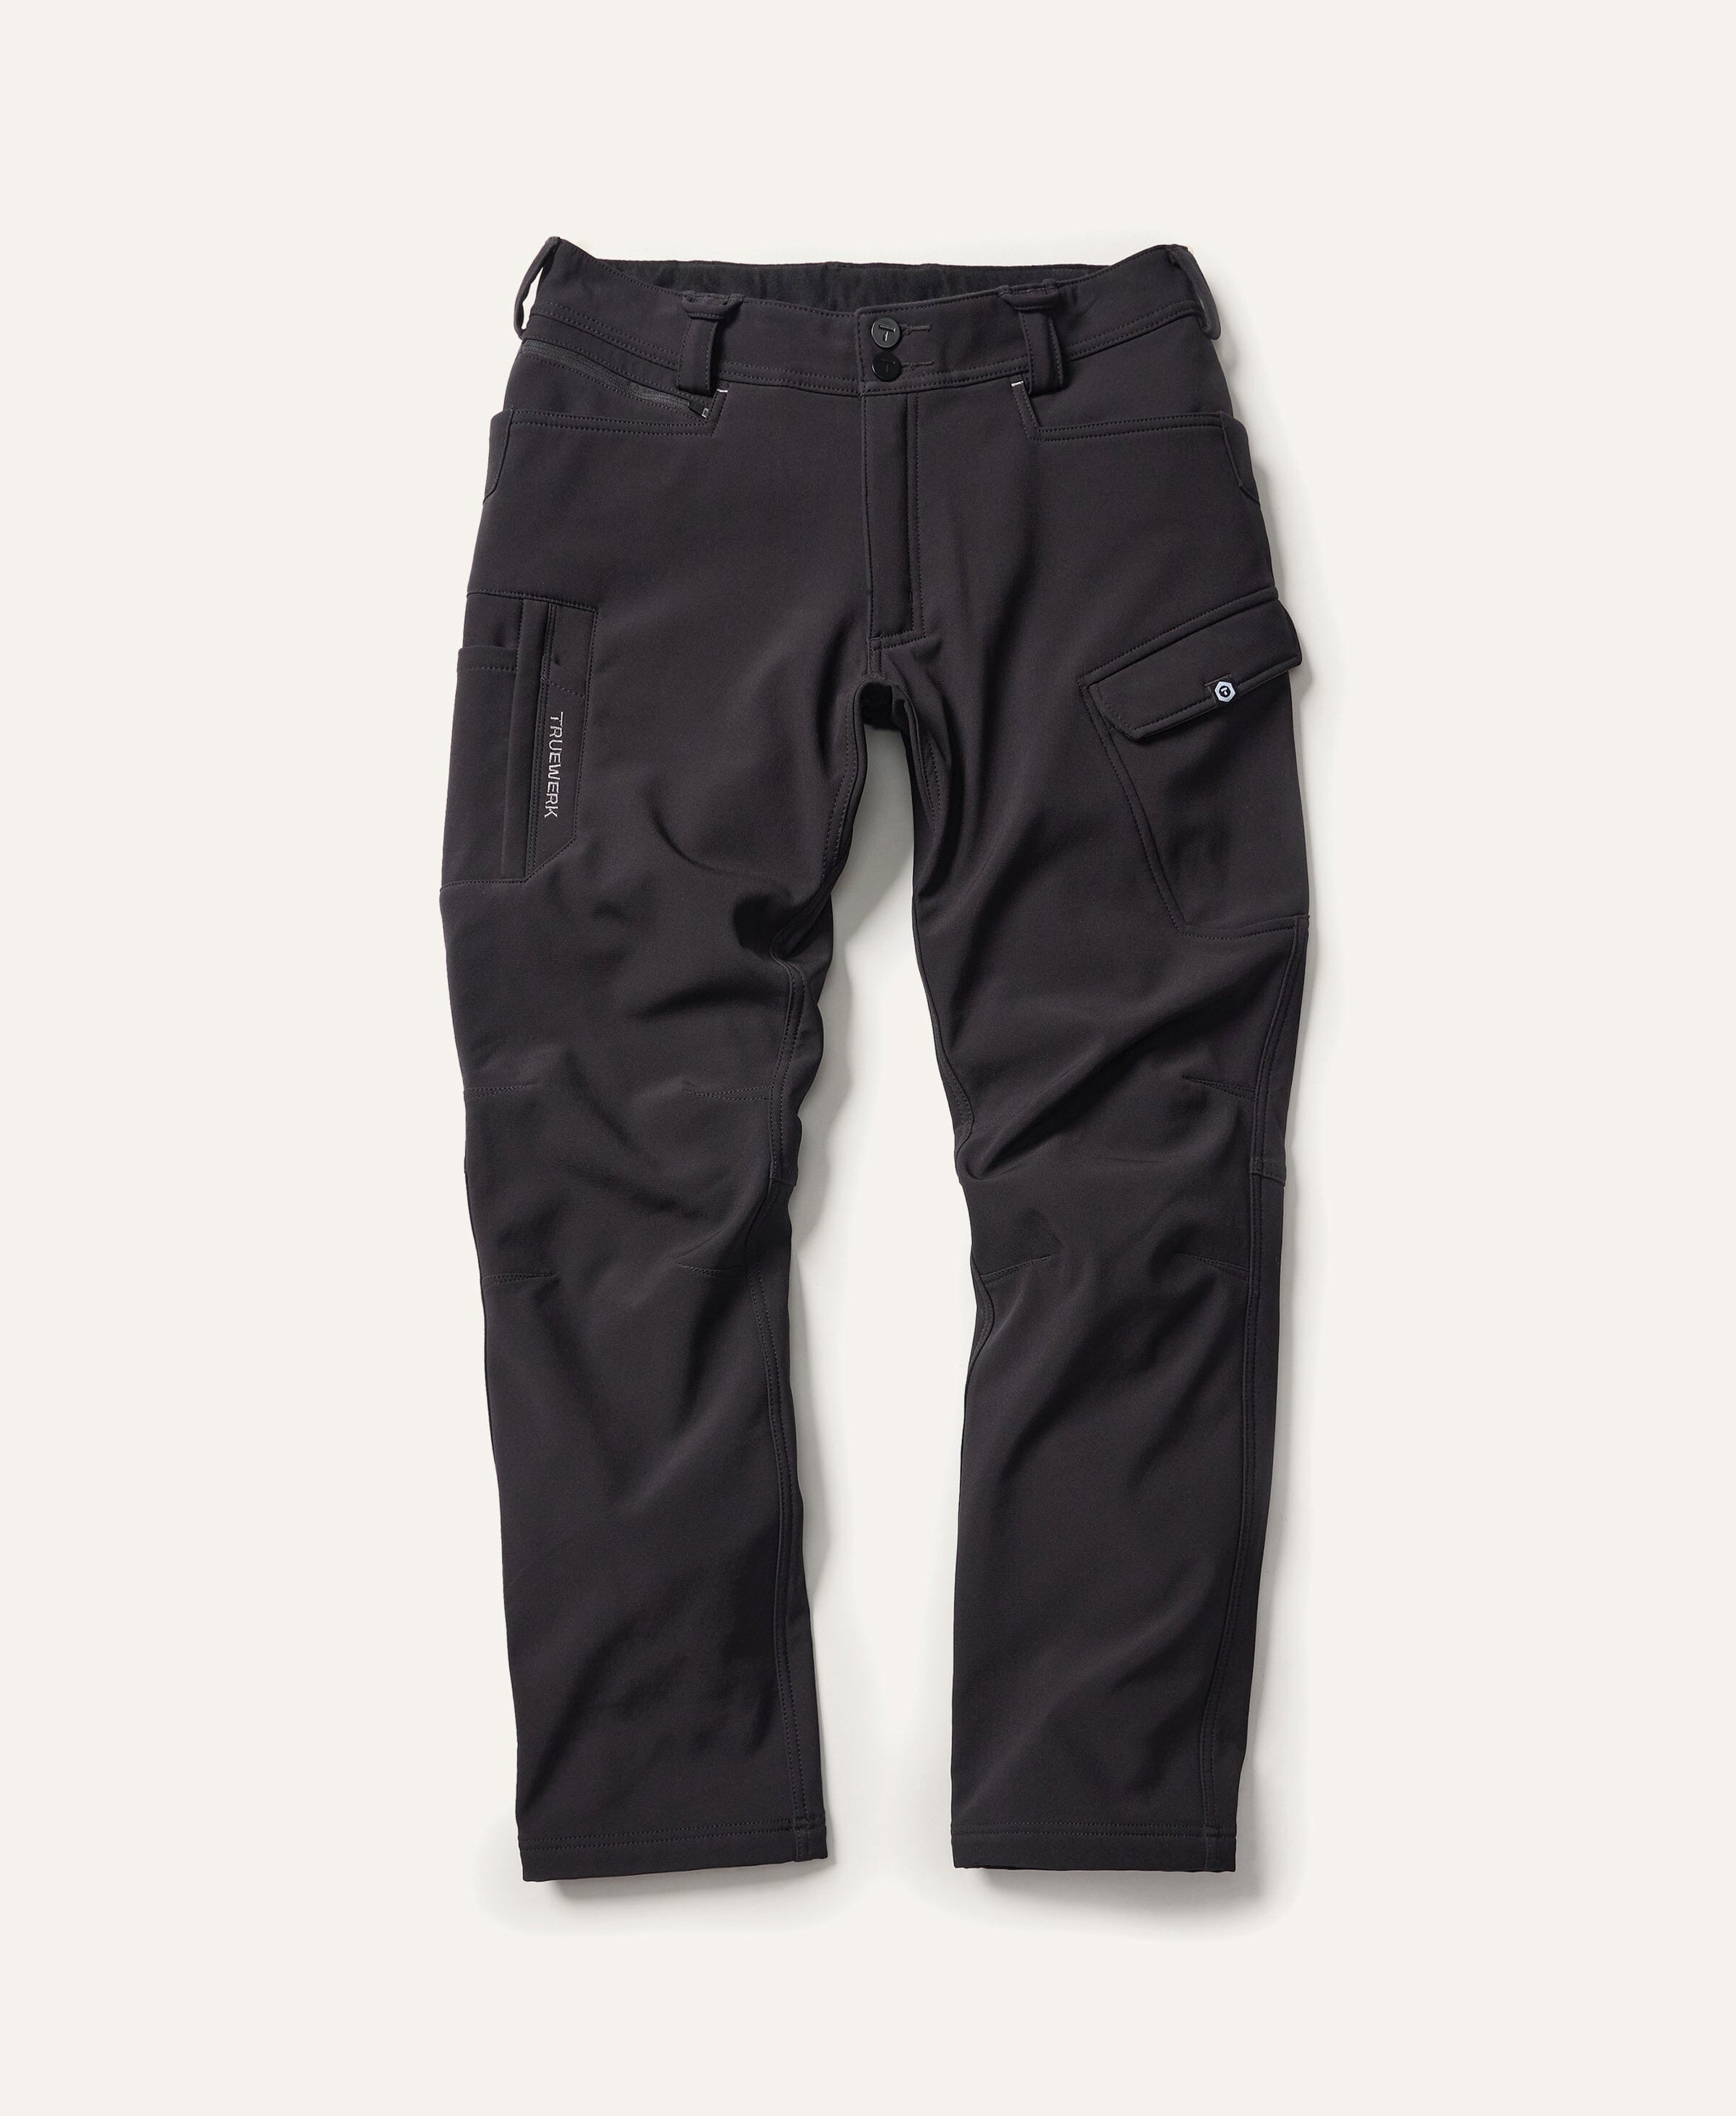 Bisley trousers up for grabs! - Professional Builder